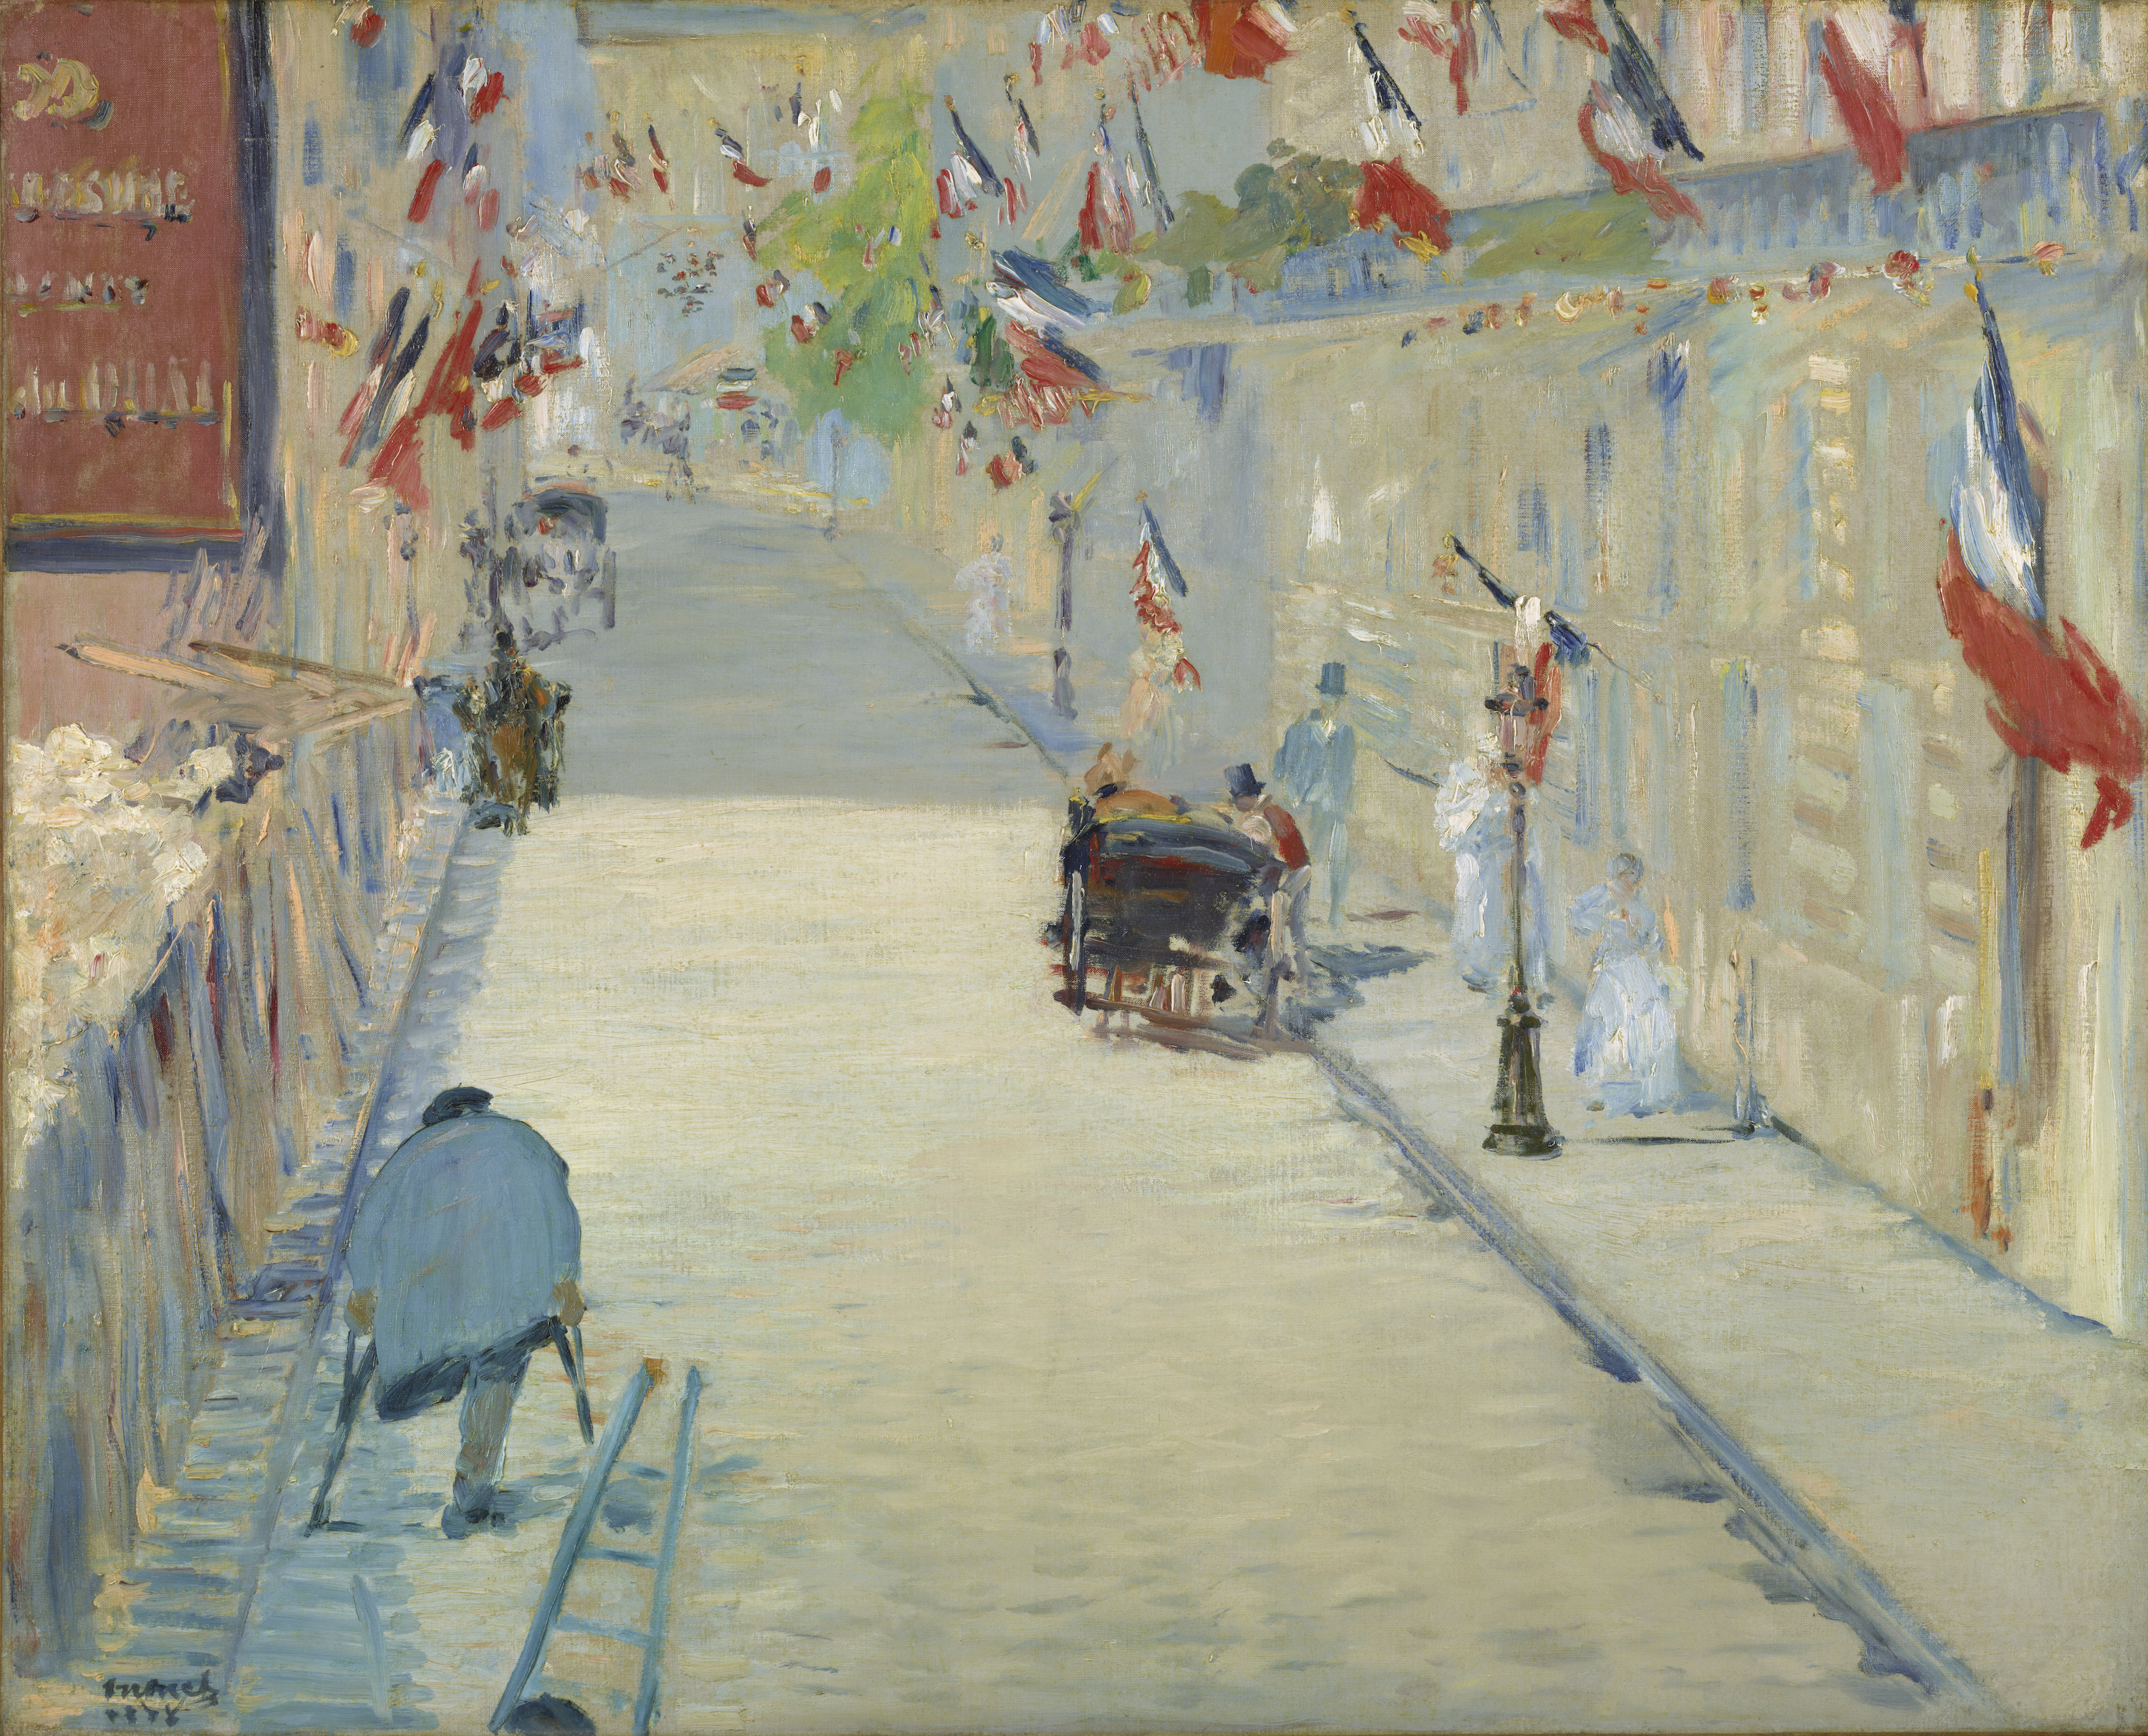 The Rue Mosnier with Flags by Édouard Manet - 1878 - 80 x 65.4 cm J. Paul Getty Museum